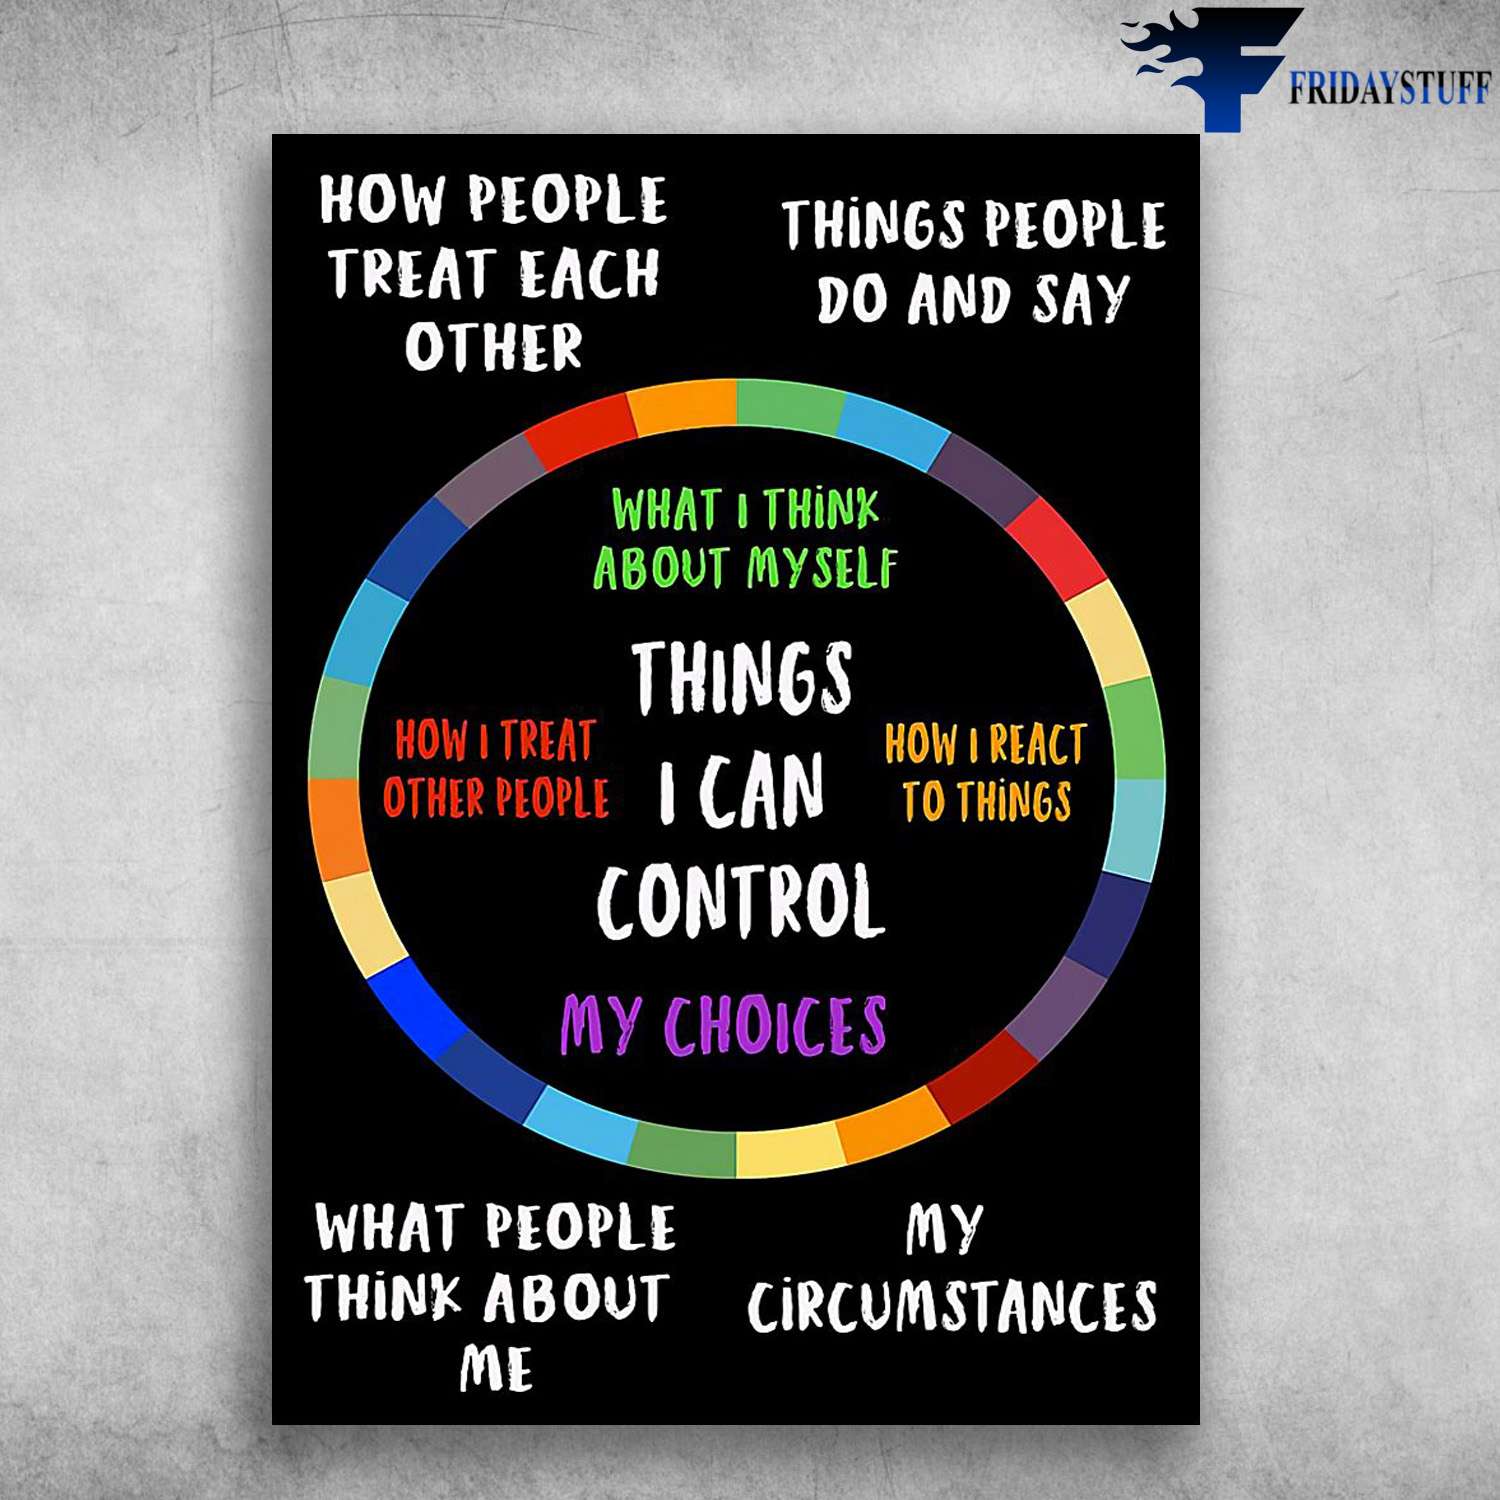 Control Yourself - Things I Can Control, How People Treat Each Other, Things People Do And Say, What I Think About Myself, My Choices